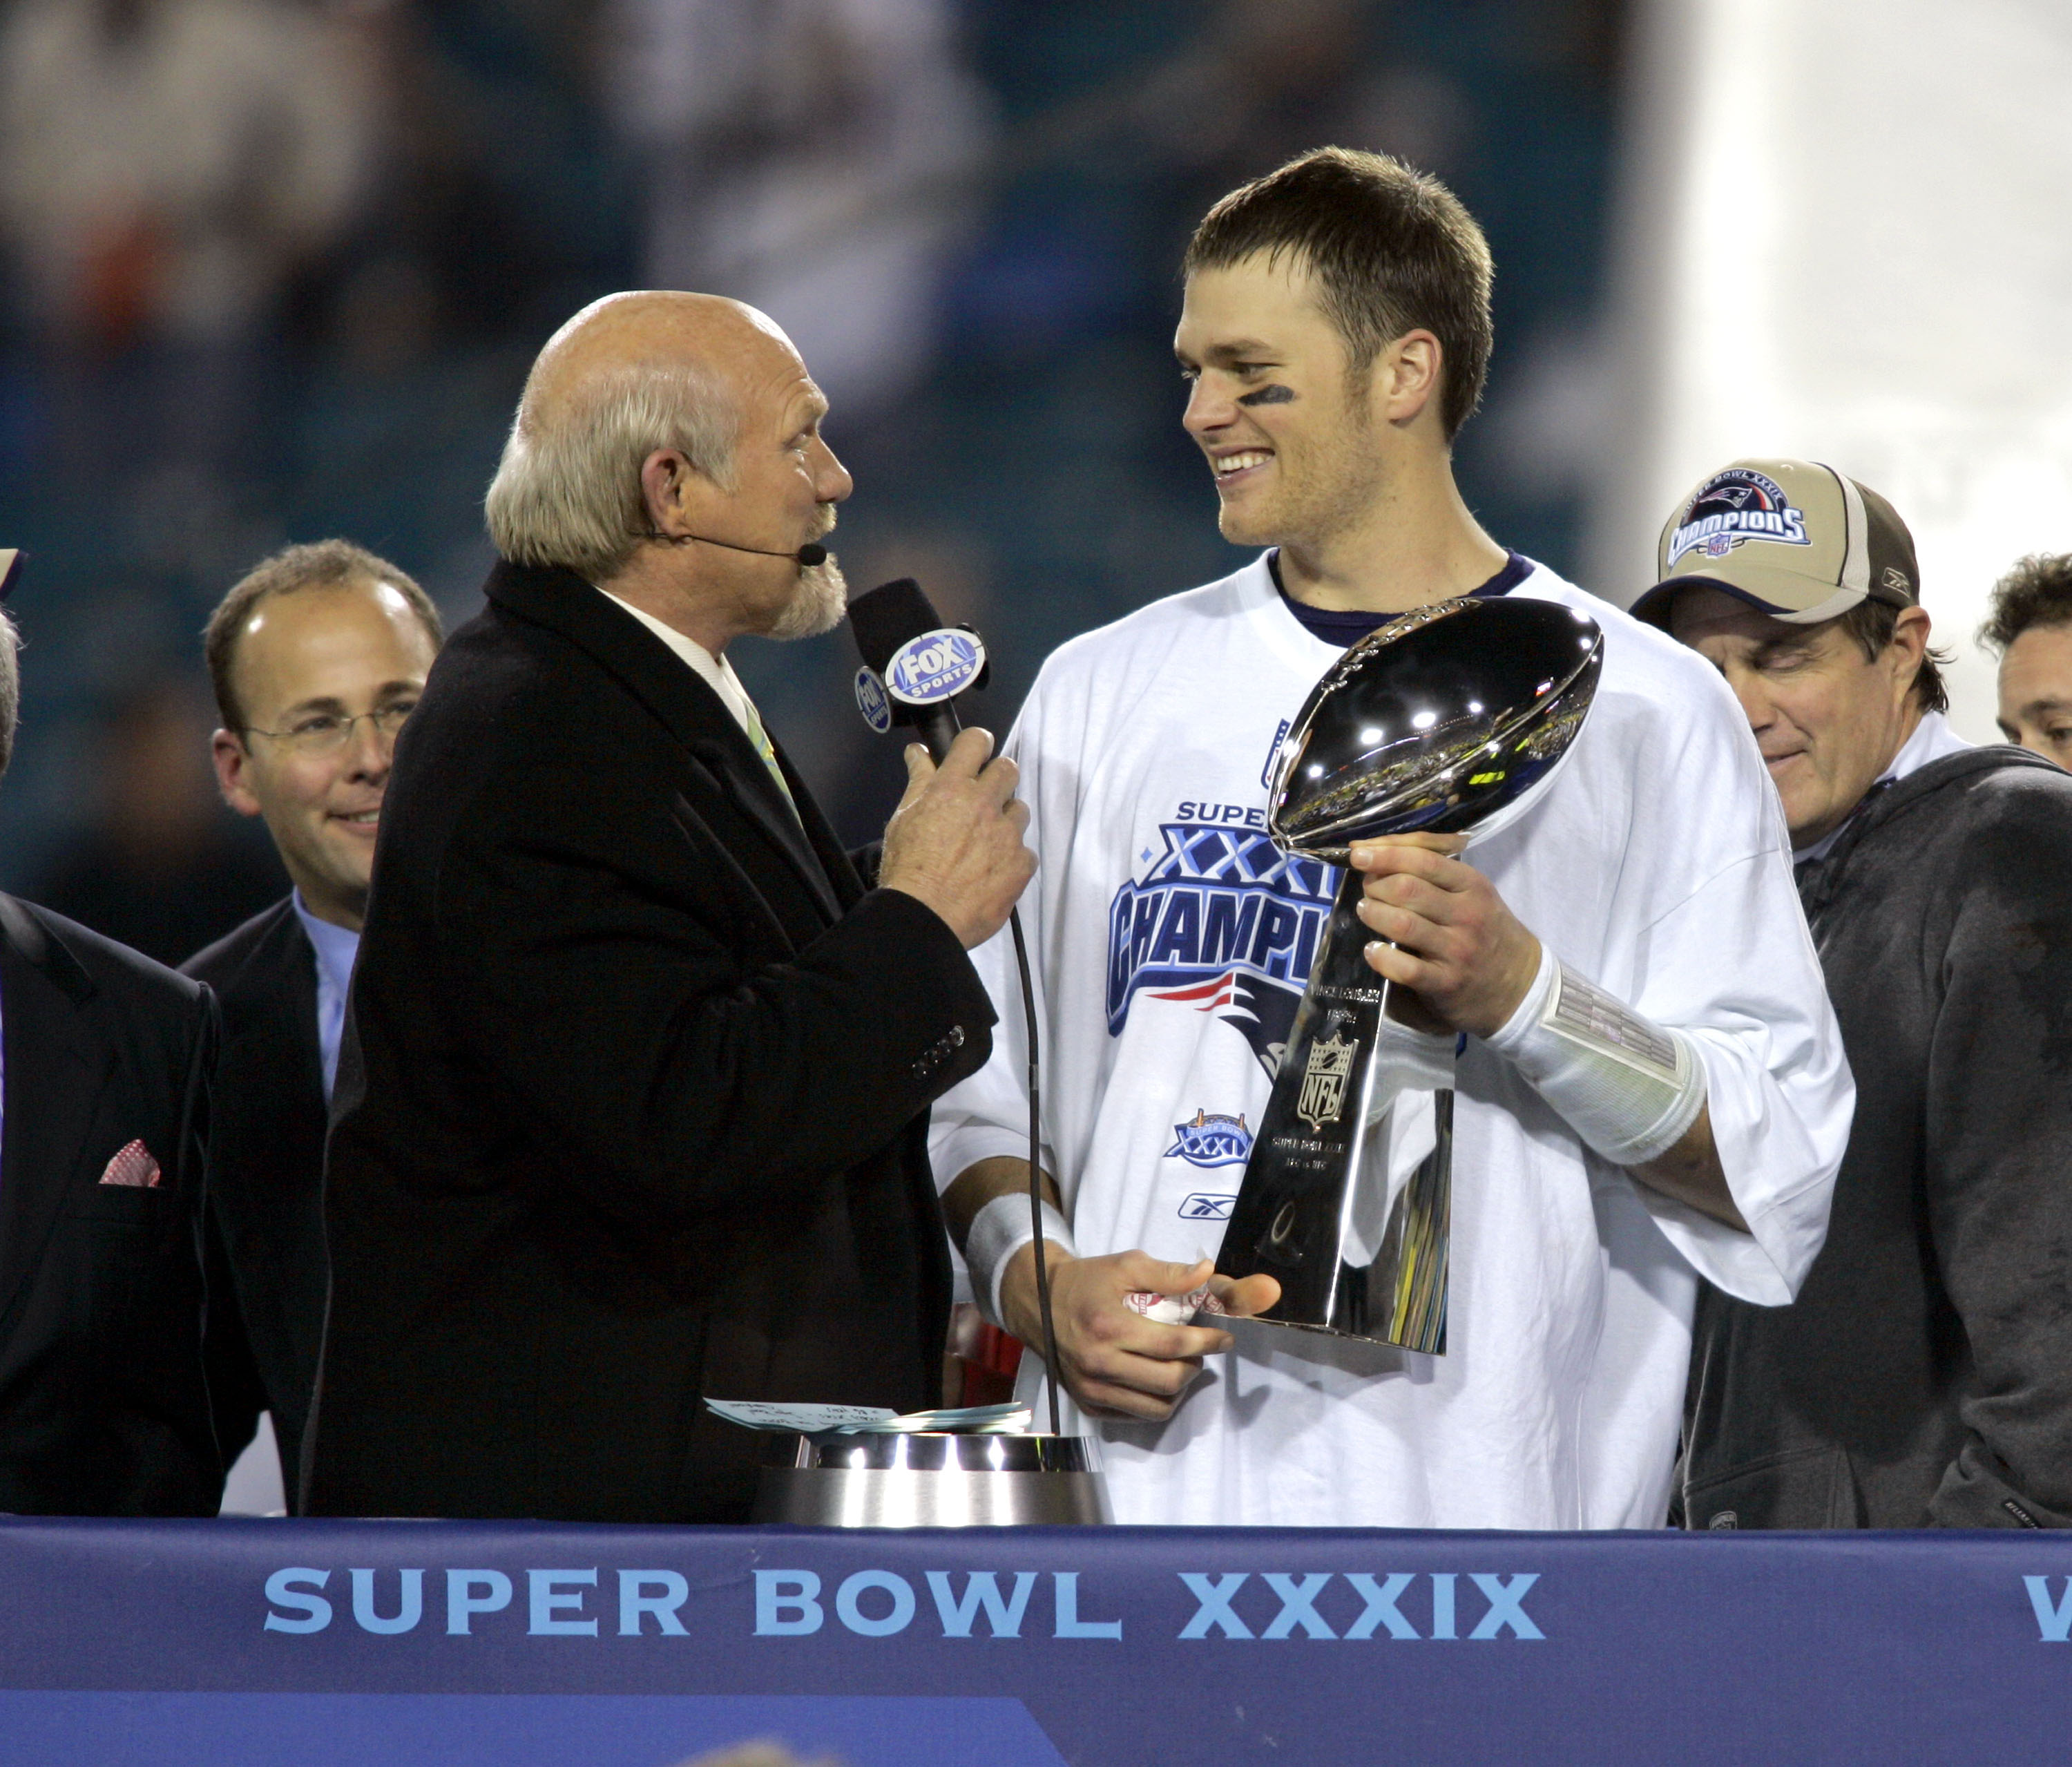 Gallery: Tom Brady playing in 2005 Super Bowl in Jacksonville